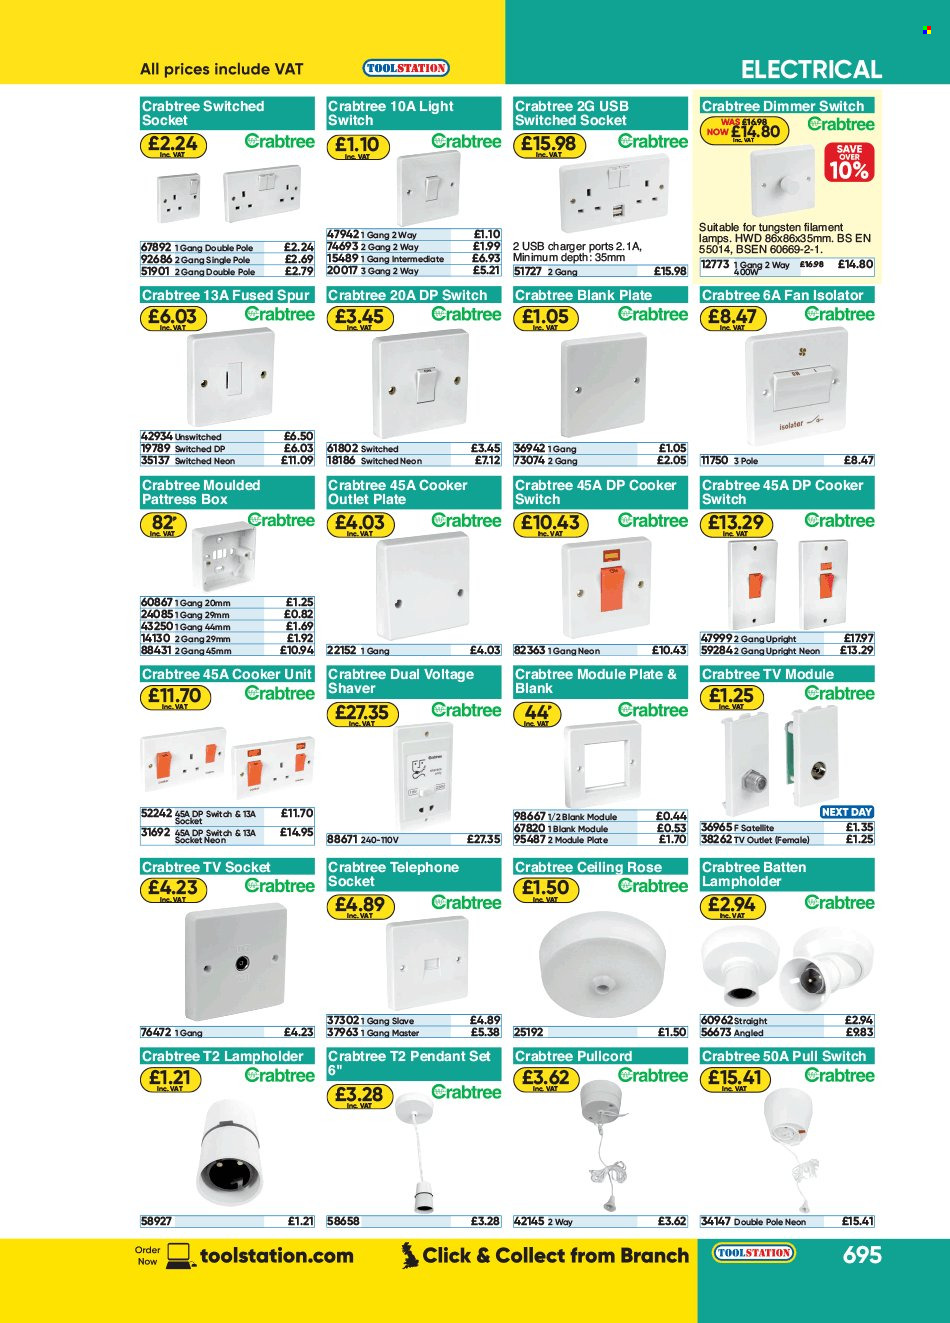 thumbnail - Toolstation offer  - Sales products - switch, socket, fan isolator. Page 695.